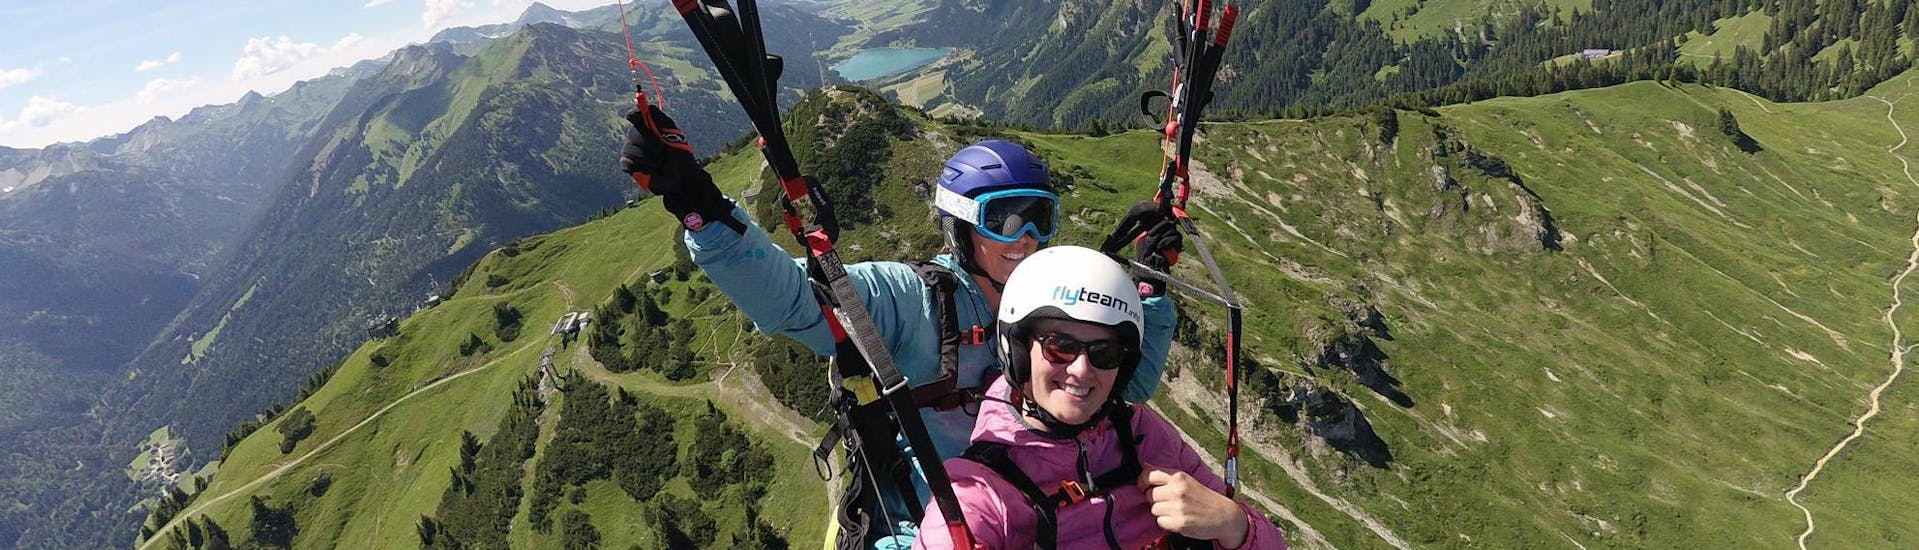 A tandem pilot from FlyTeam and her passenger are flying over the green mountain landscape during a tandem paragliding flight.